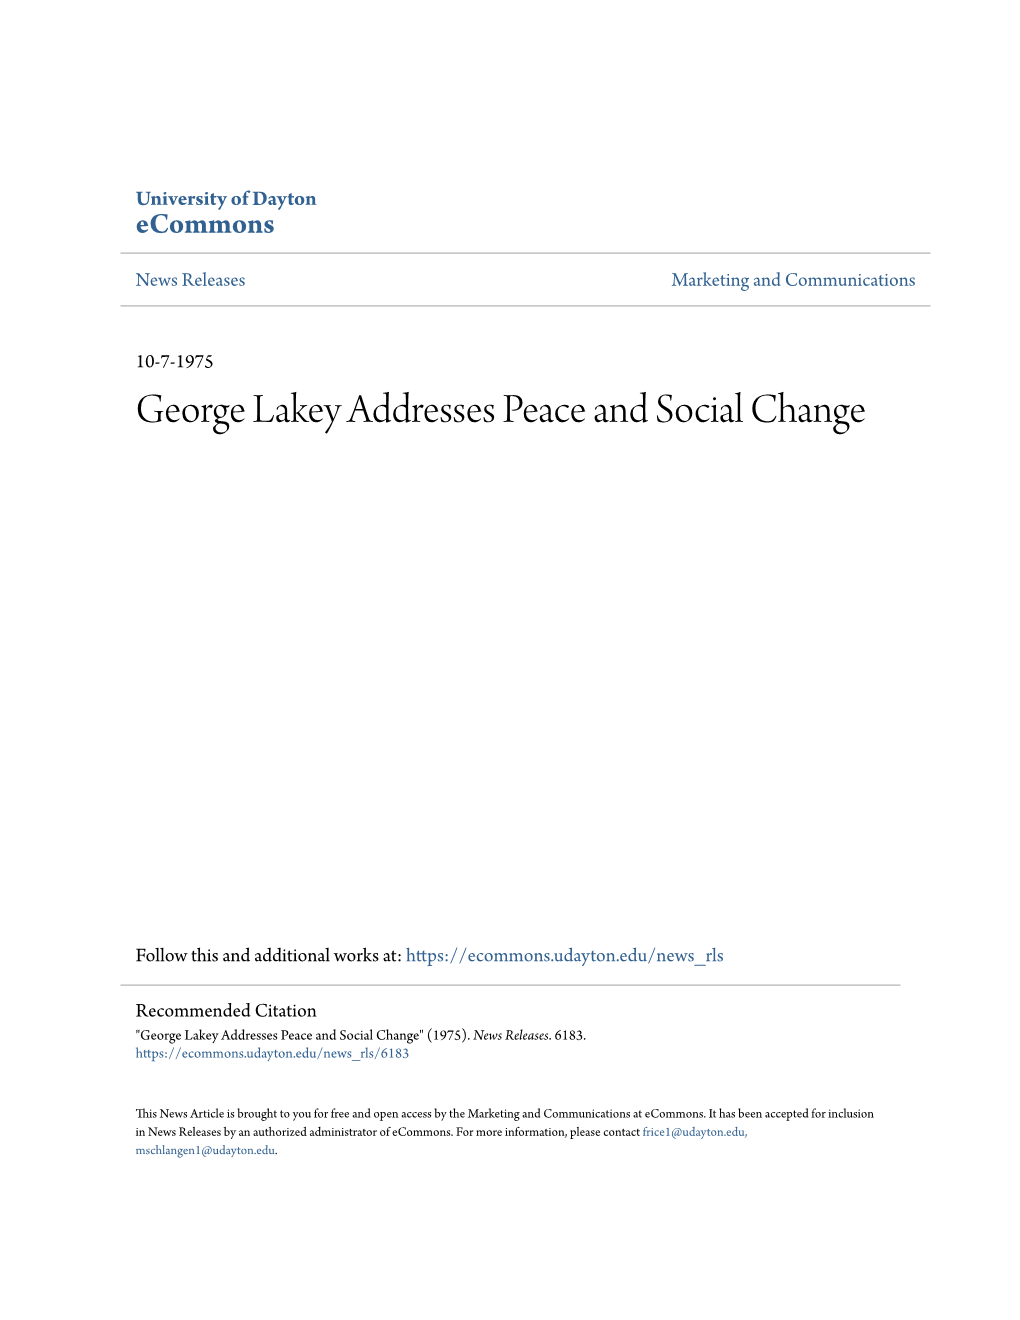 George Lakey Addresses Peace and Social Change